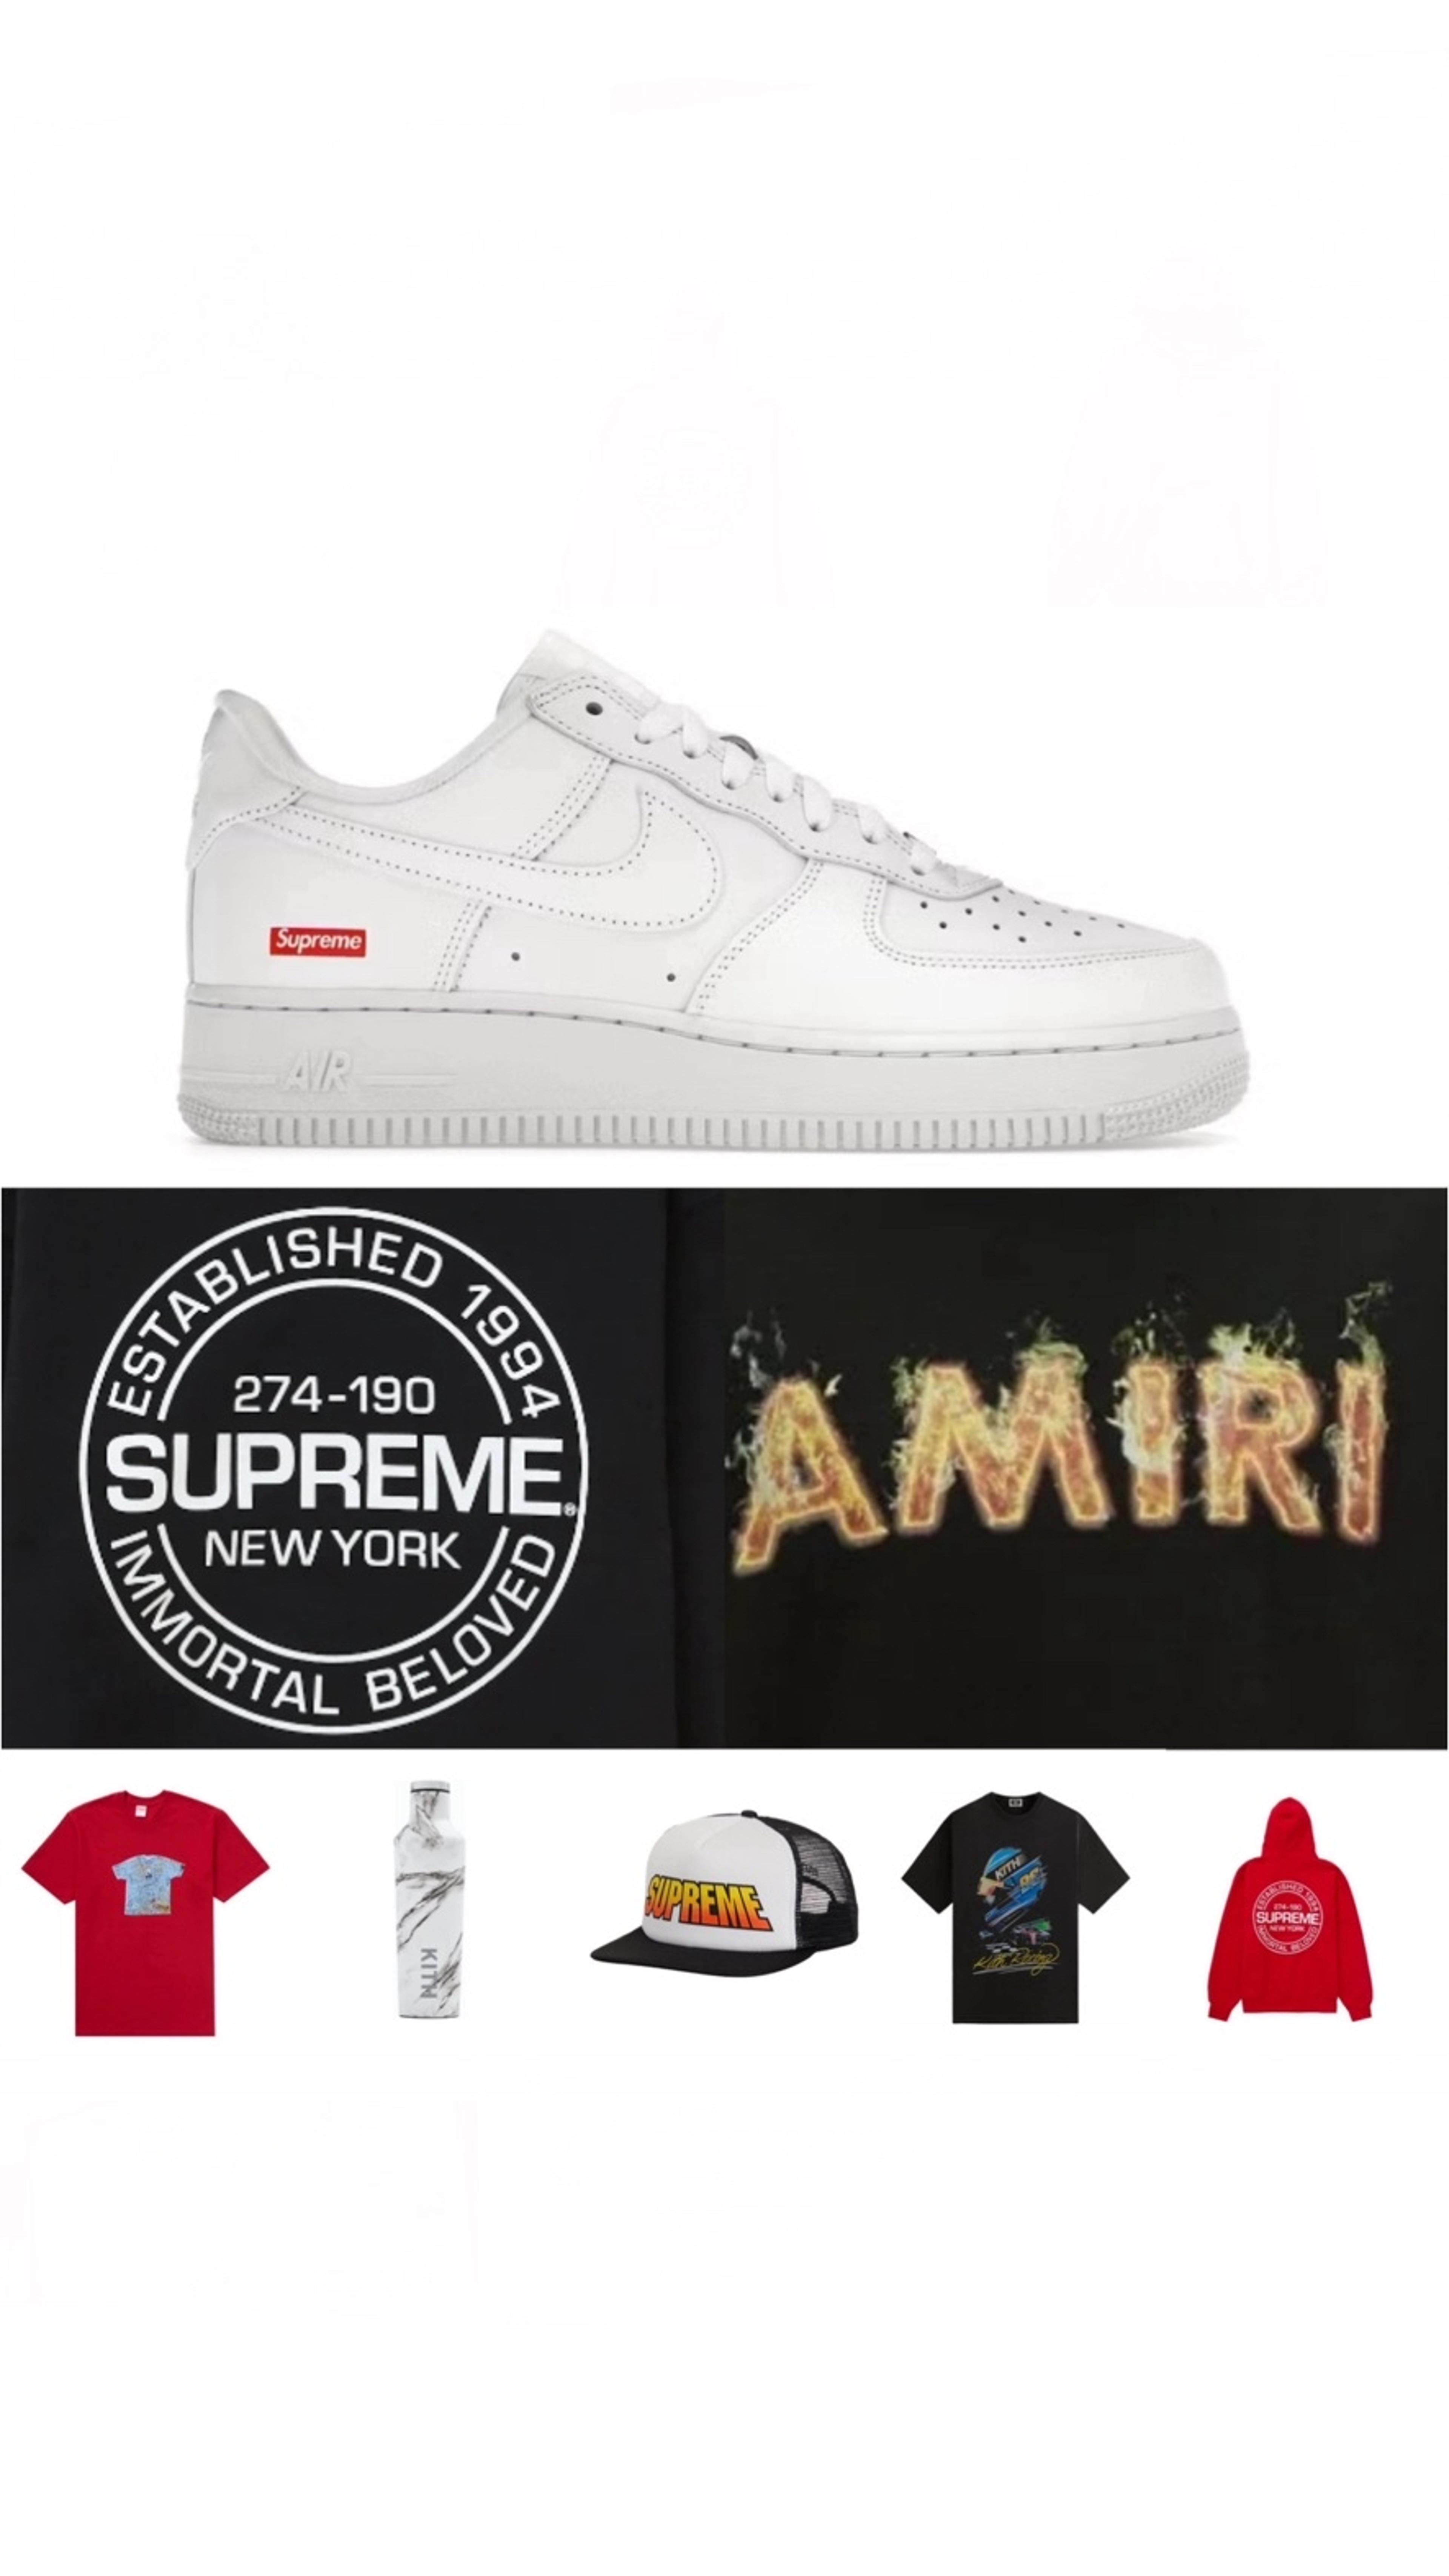 Preview image for the show titled "23/30 AMIRI,SUPREME, KITH AND MORE‼️" at Today @ 1:45 AM